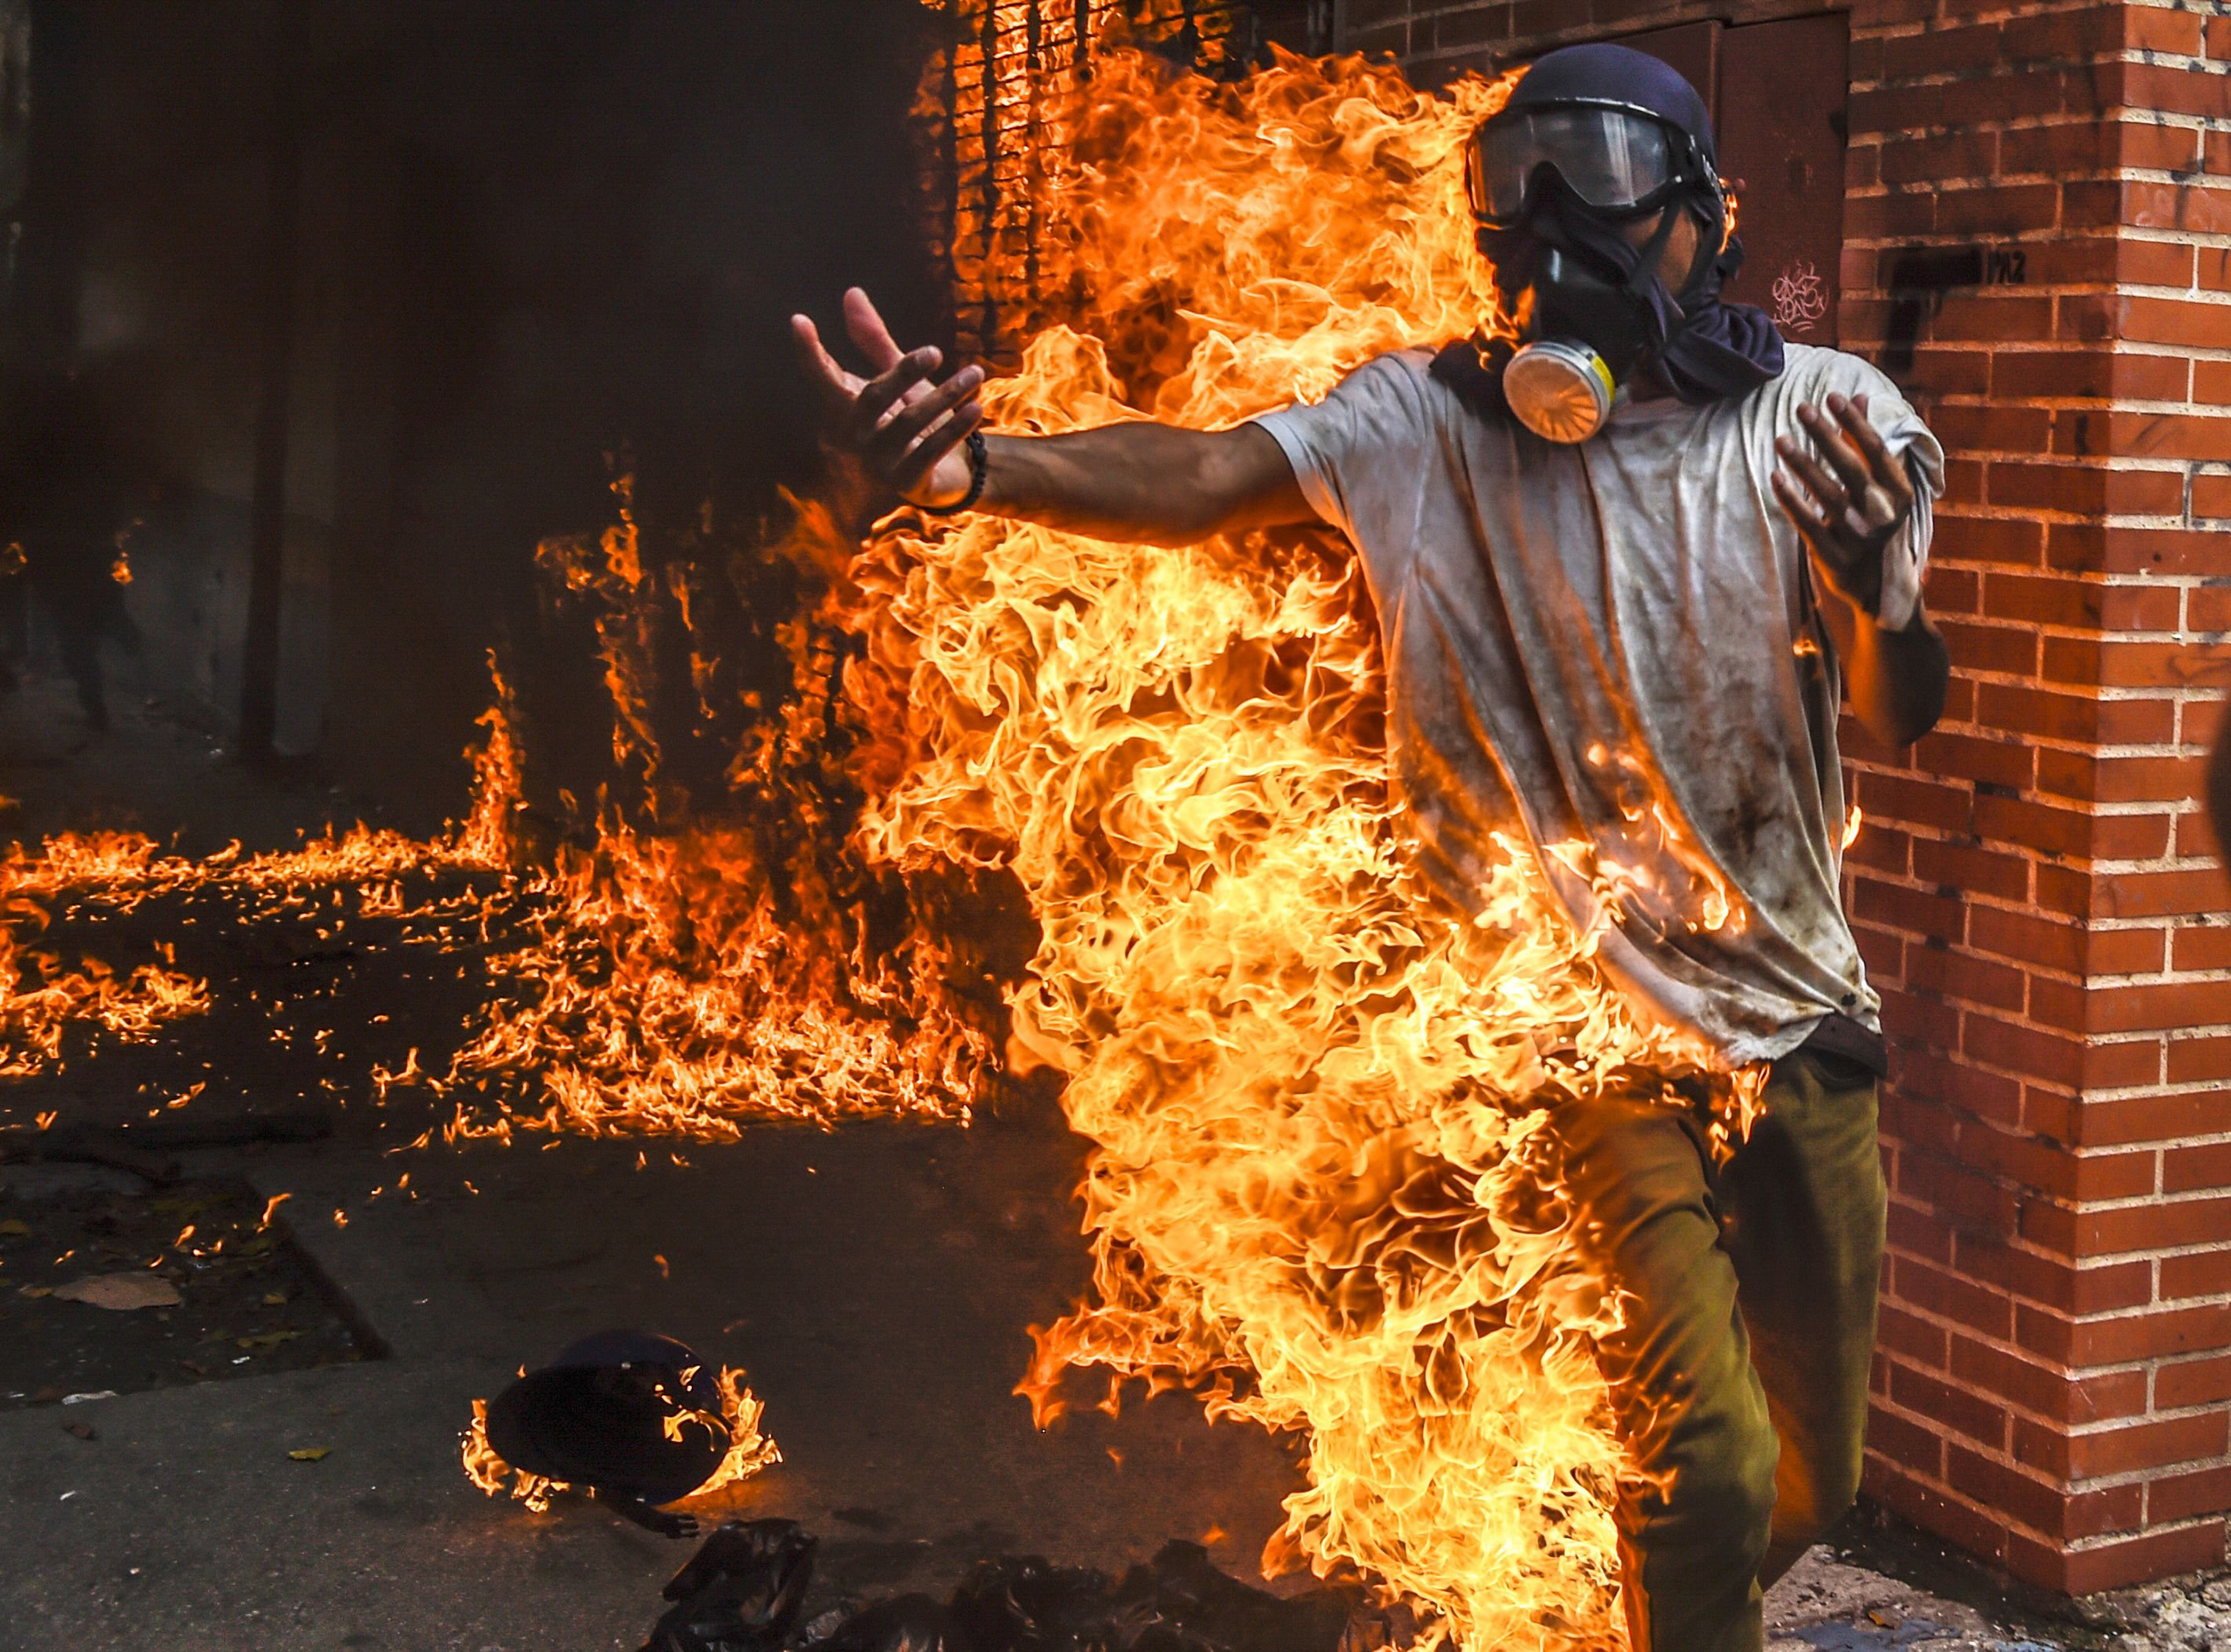 A demonstrator set ablaze runs during an anti-Maduro protest in Caracas on May 3, 2017.